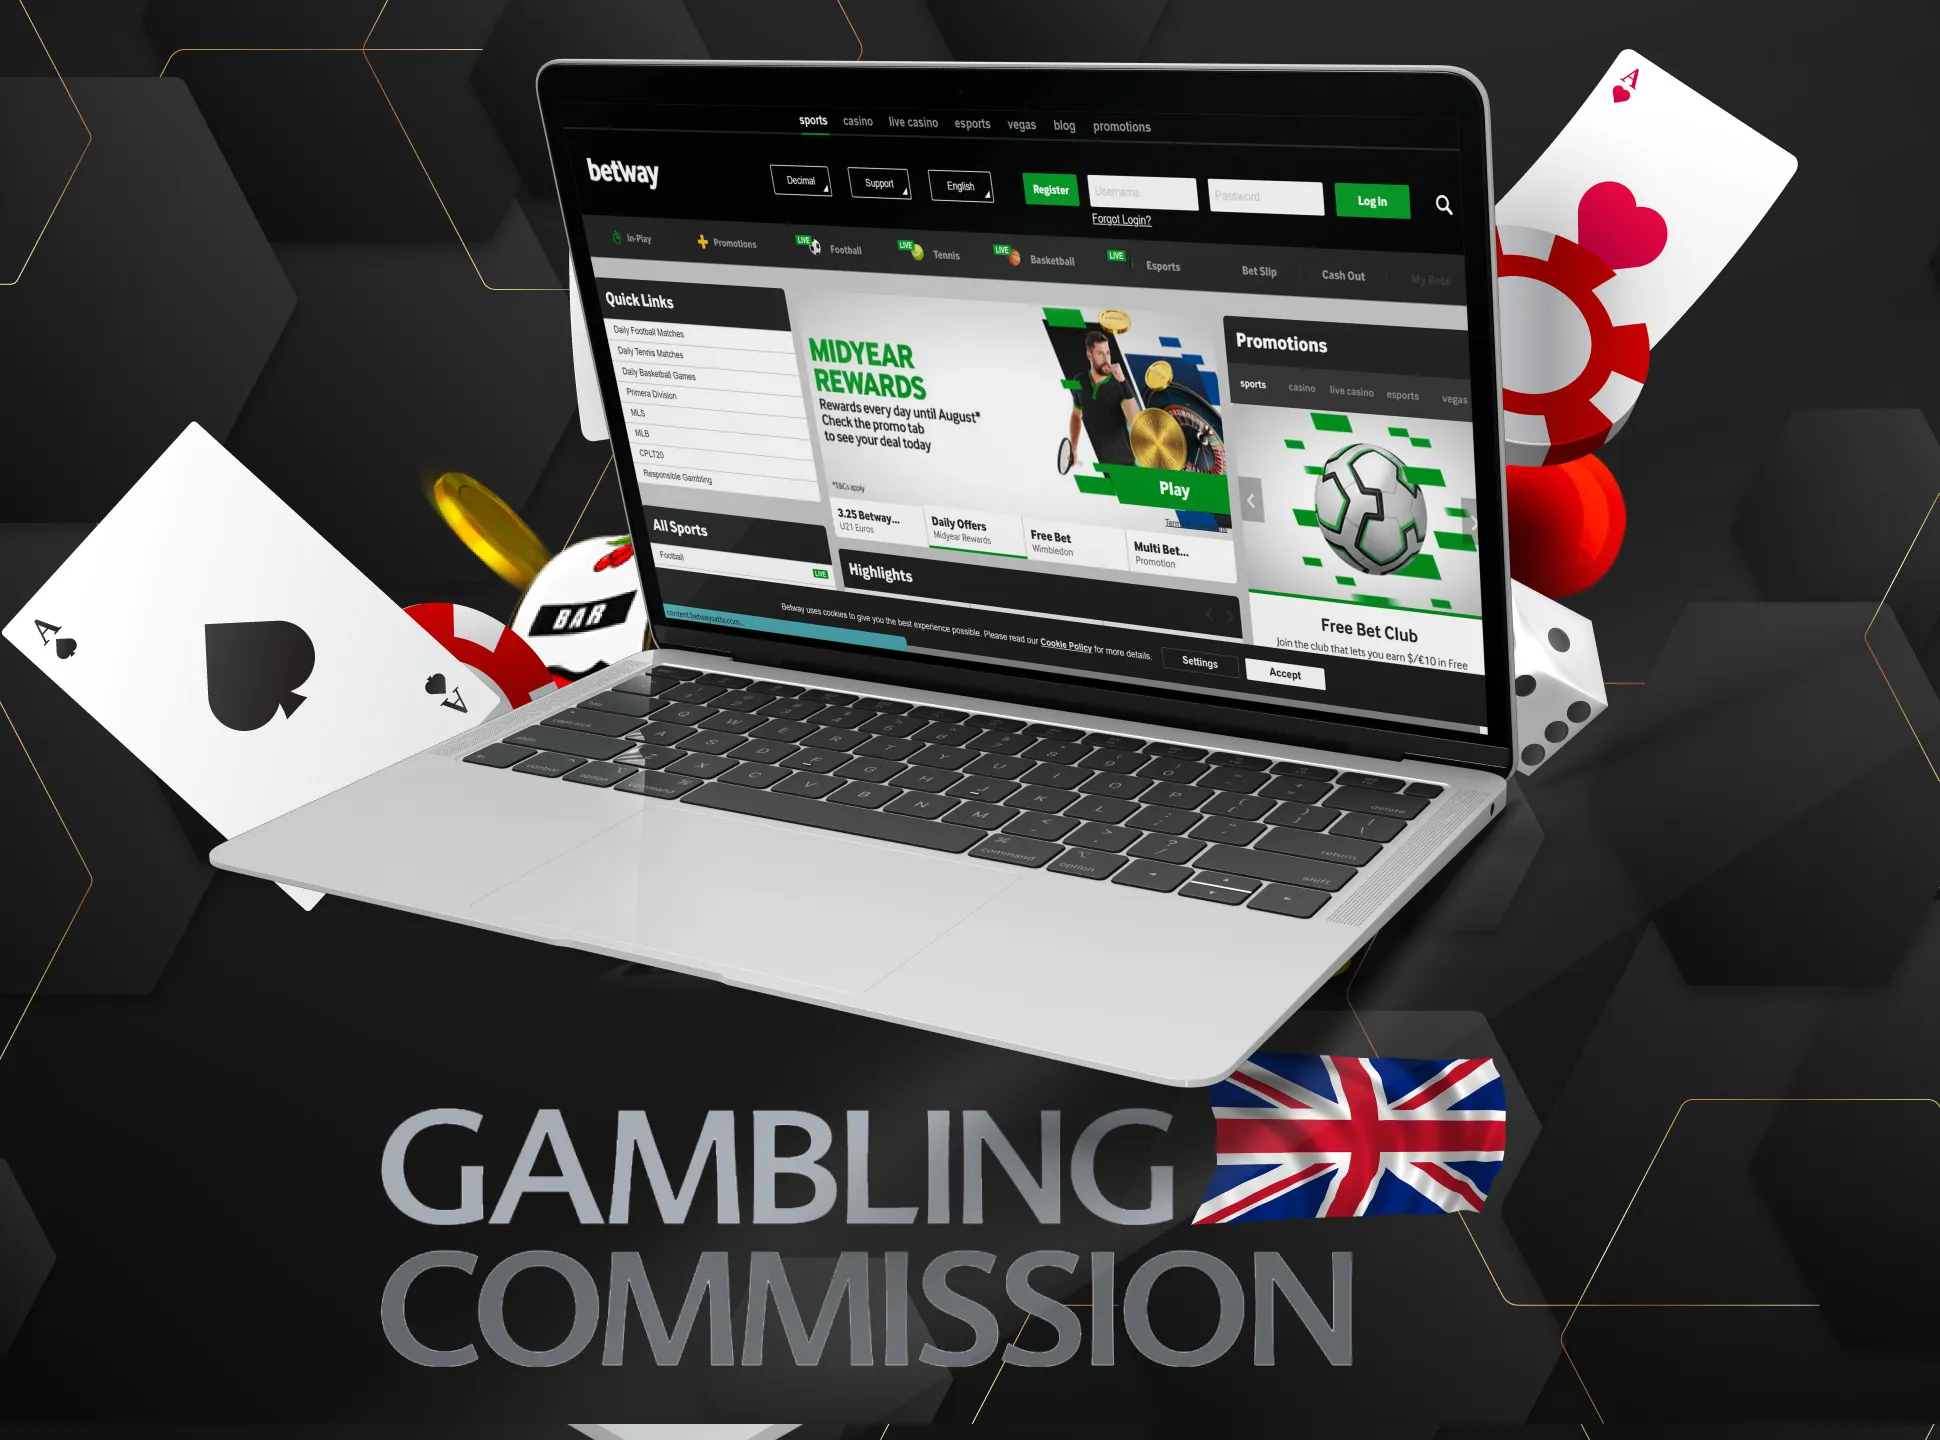 UK Gambling Commission guarantees the safety and legality of betting companies.